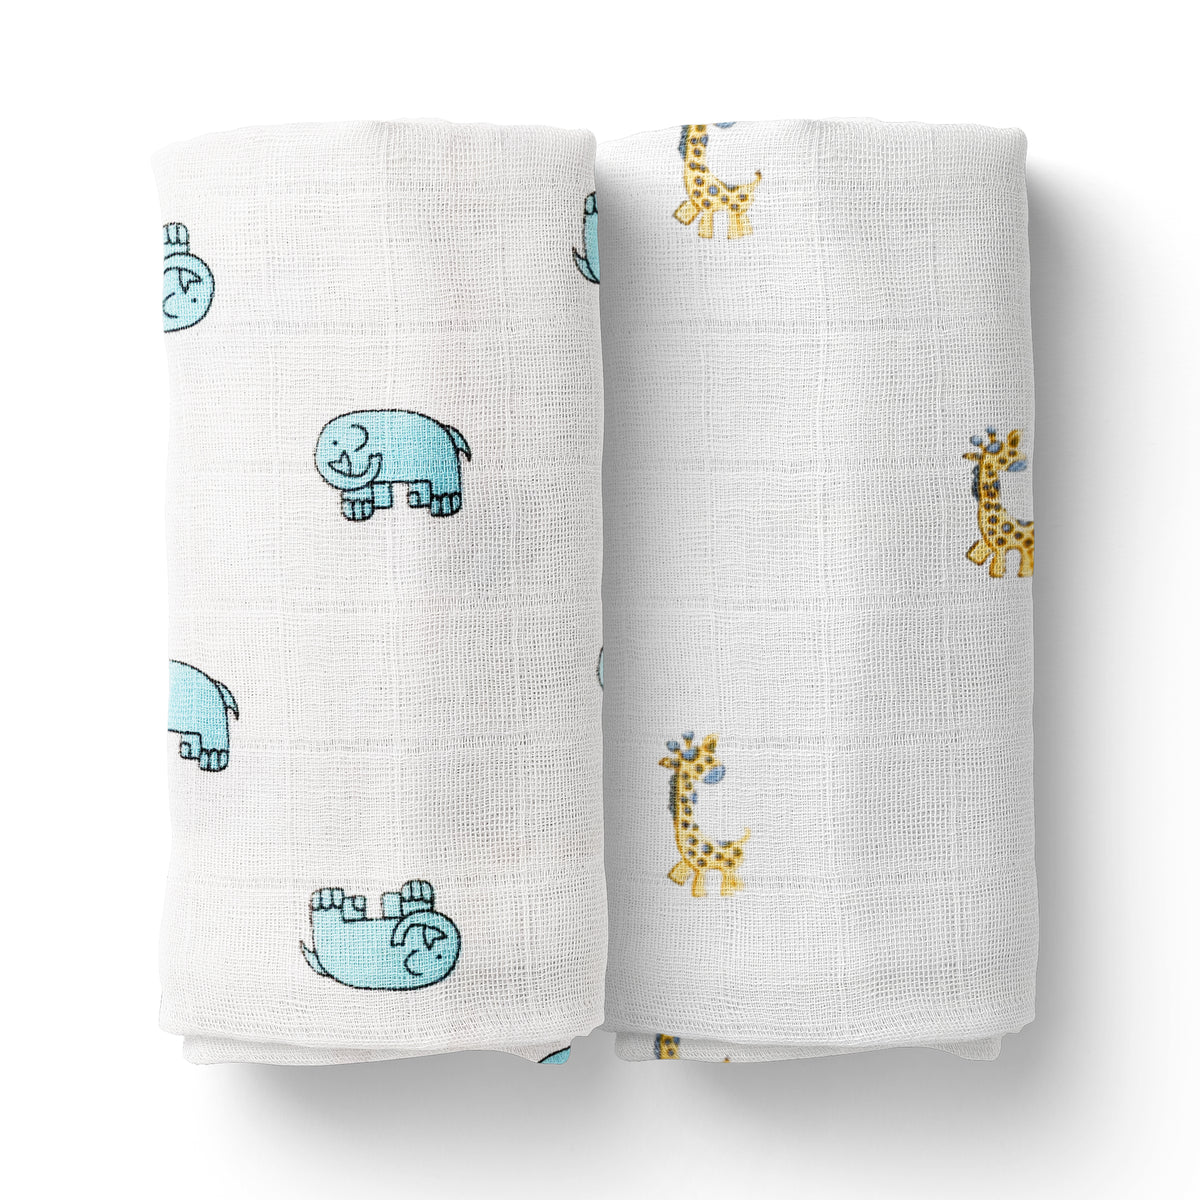 Baby Muslin Swaddle - 100x100 cm  - Pack of 2 - Cute Elephant and Giraffe